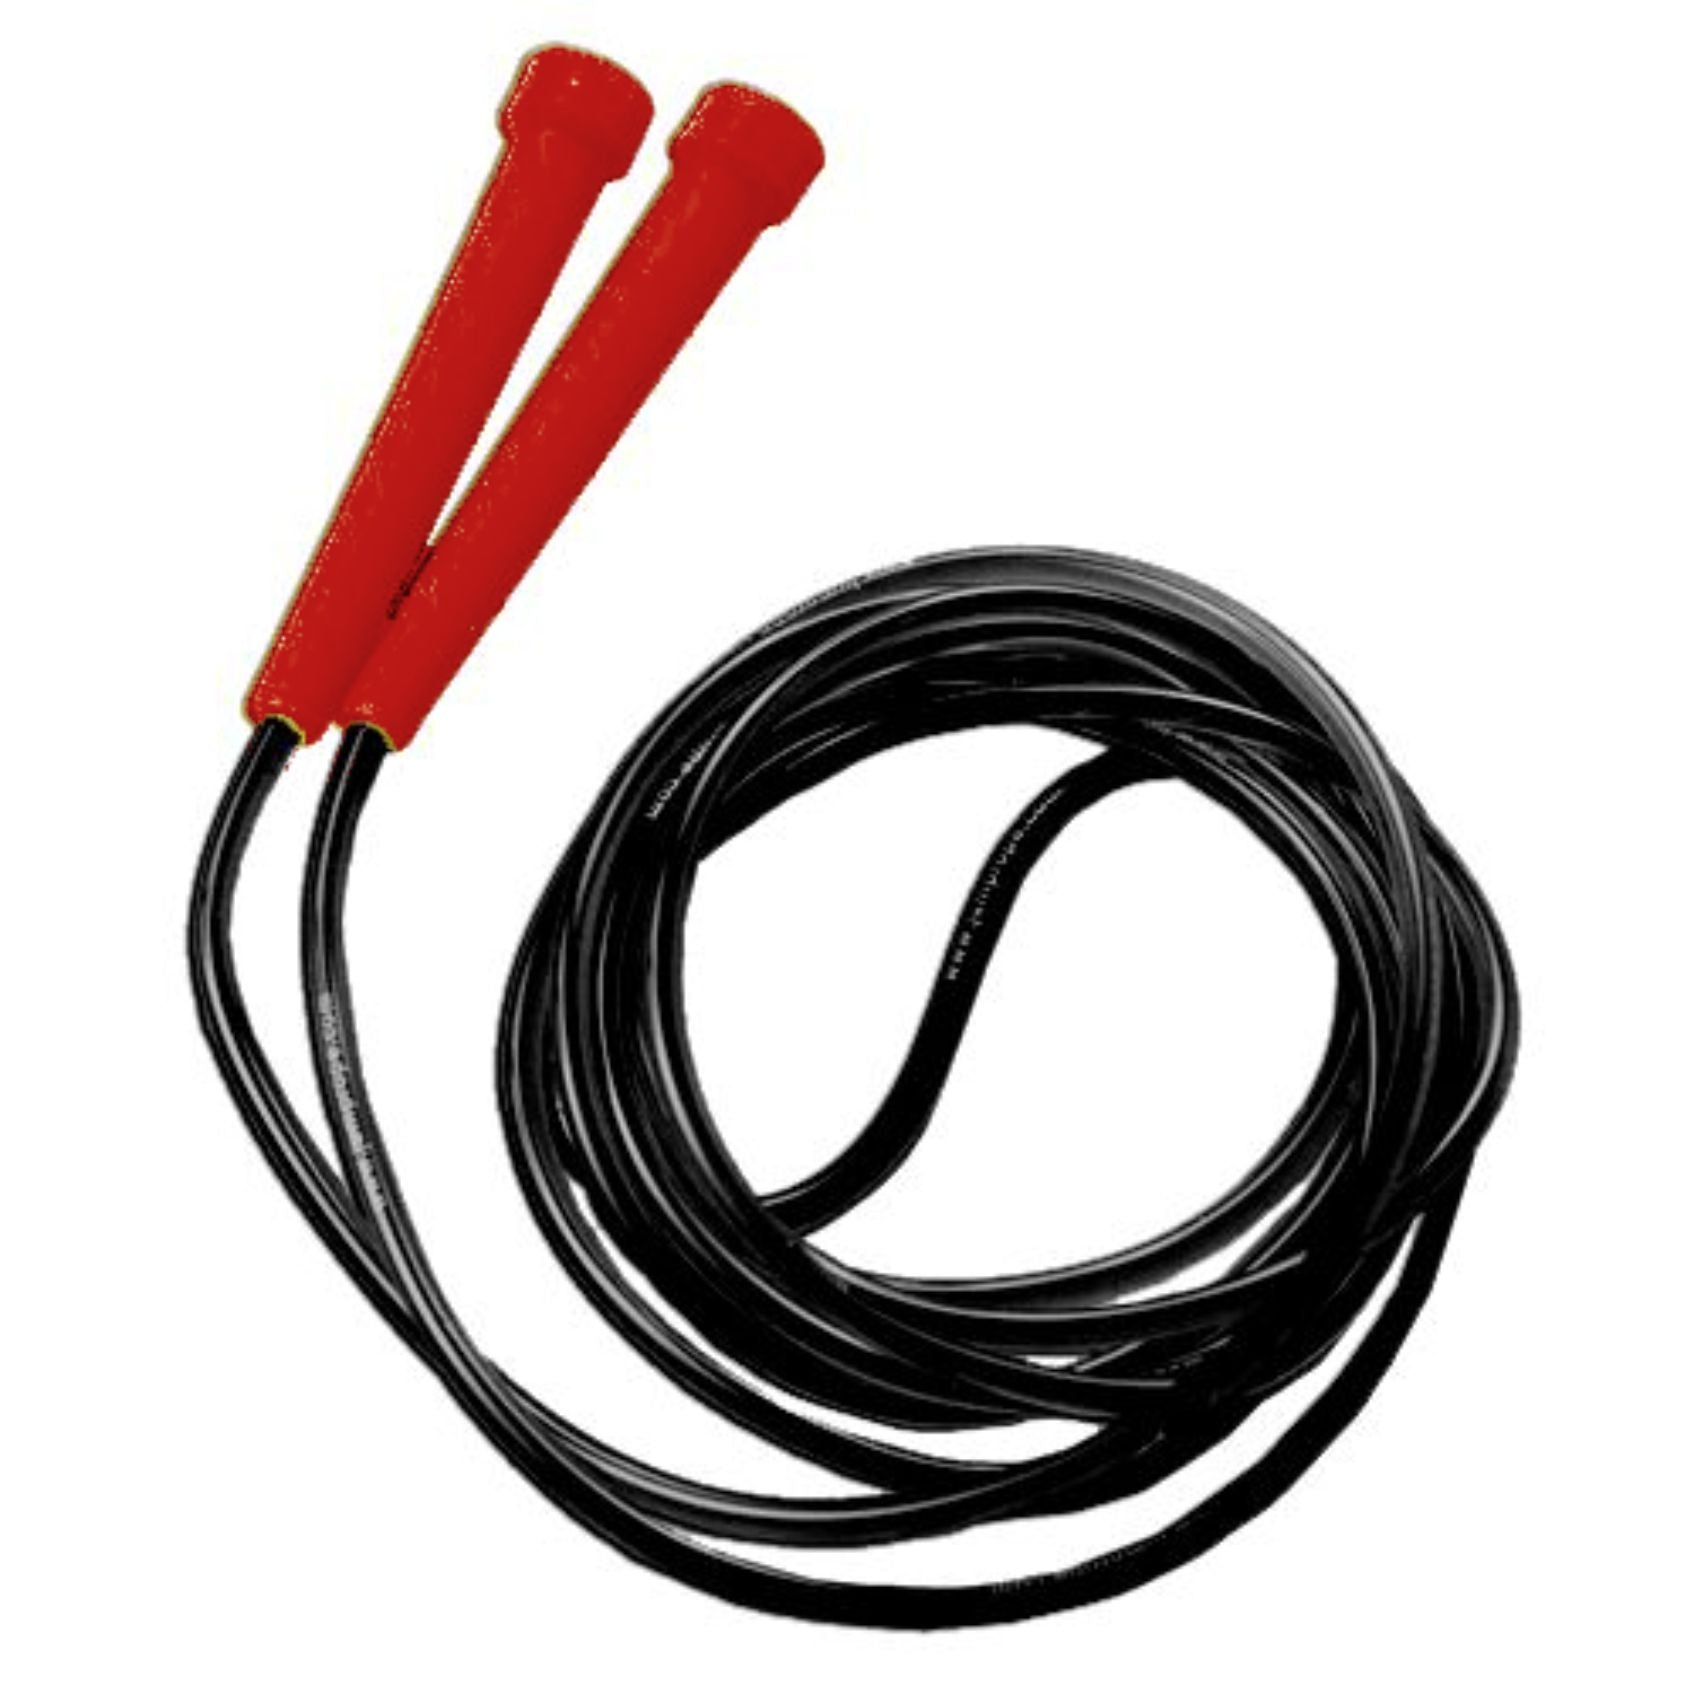 Aloyd Fitness JumpRope 10ft Speed Rope - Fitness Experience